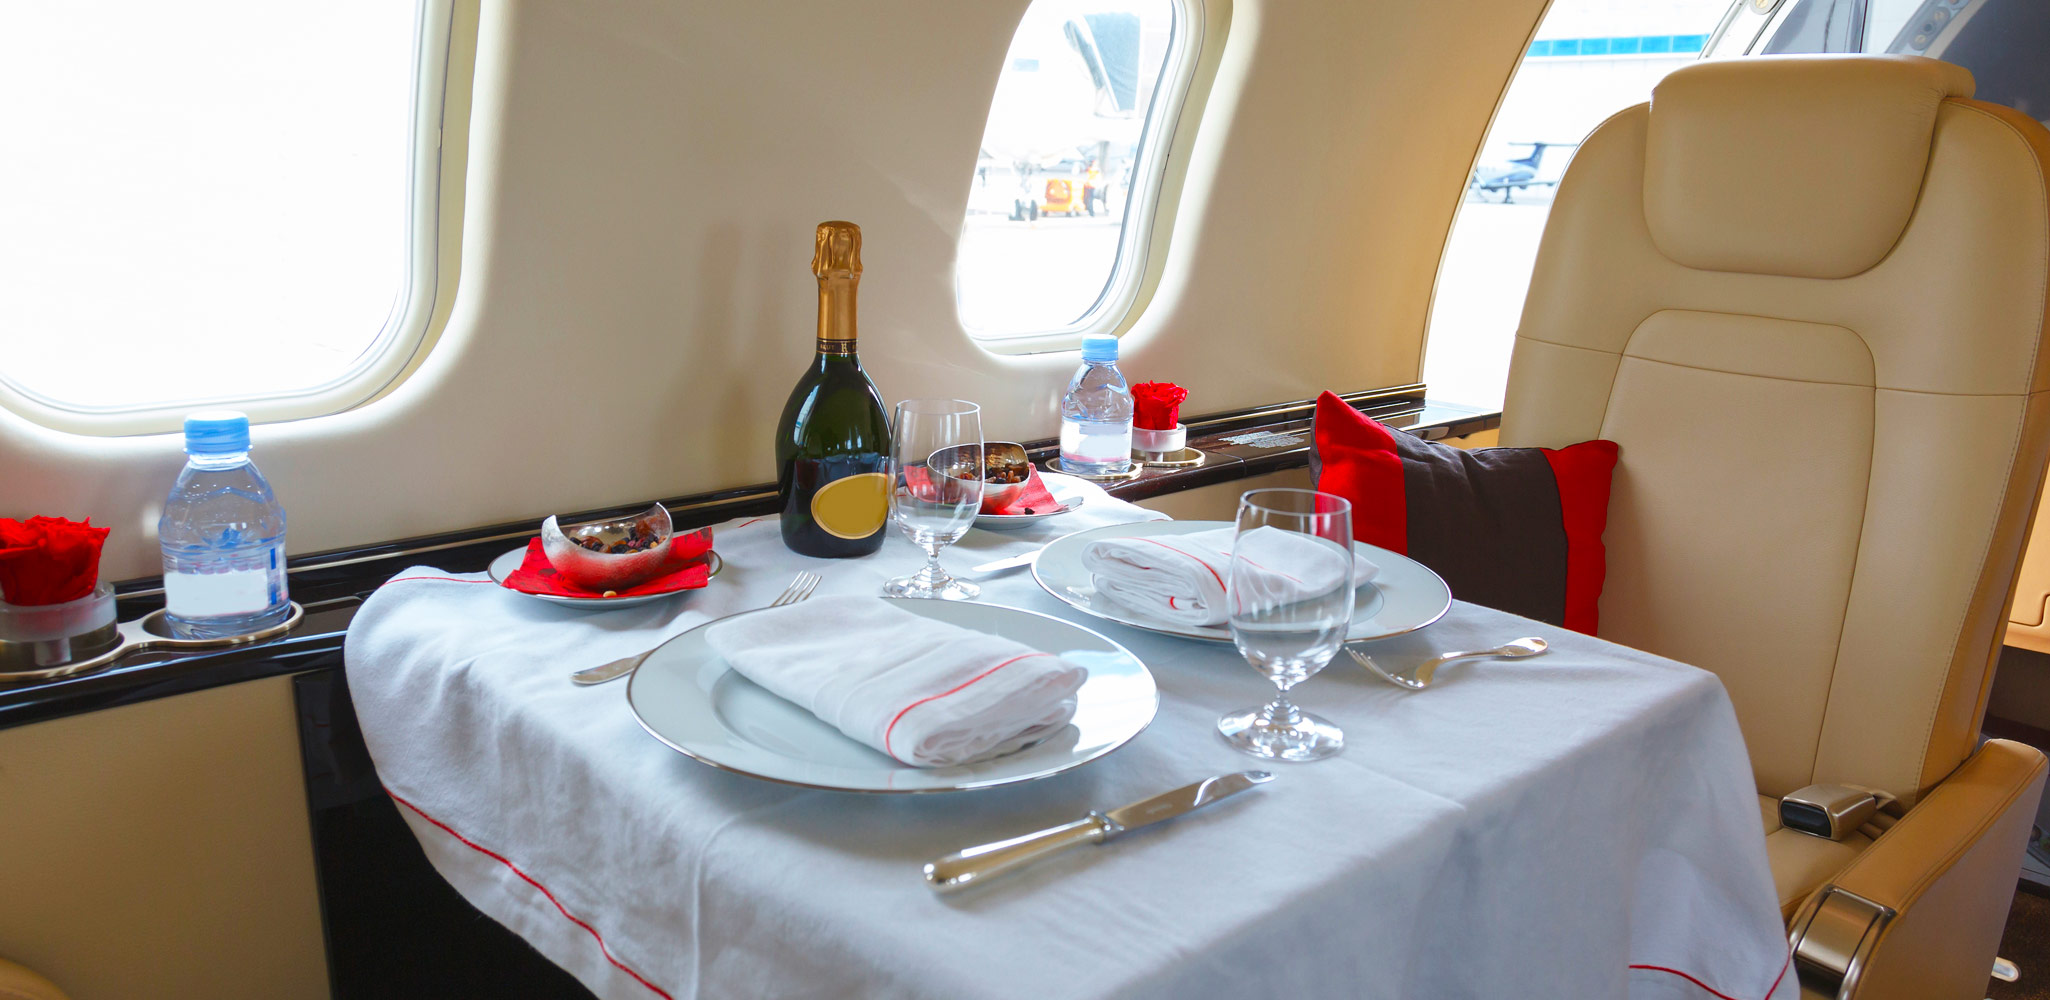 The Luxurious and Affordable Business Class Travel - Born Free - Fare